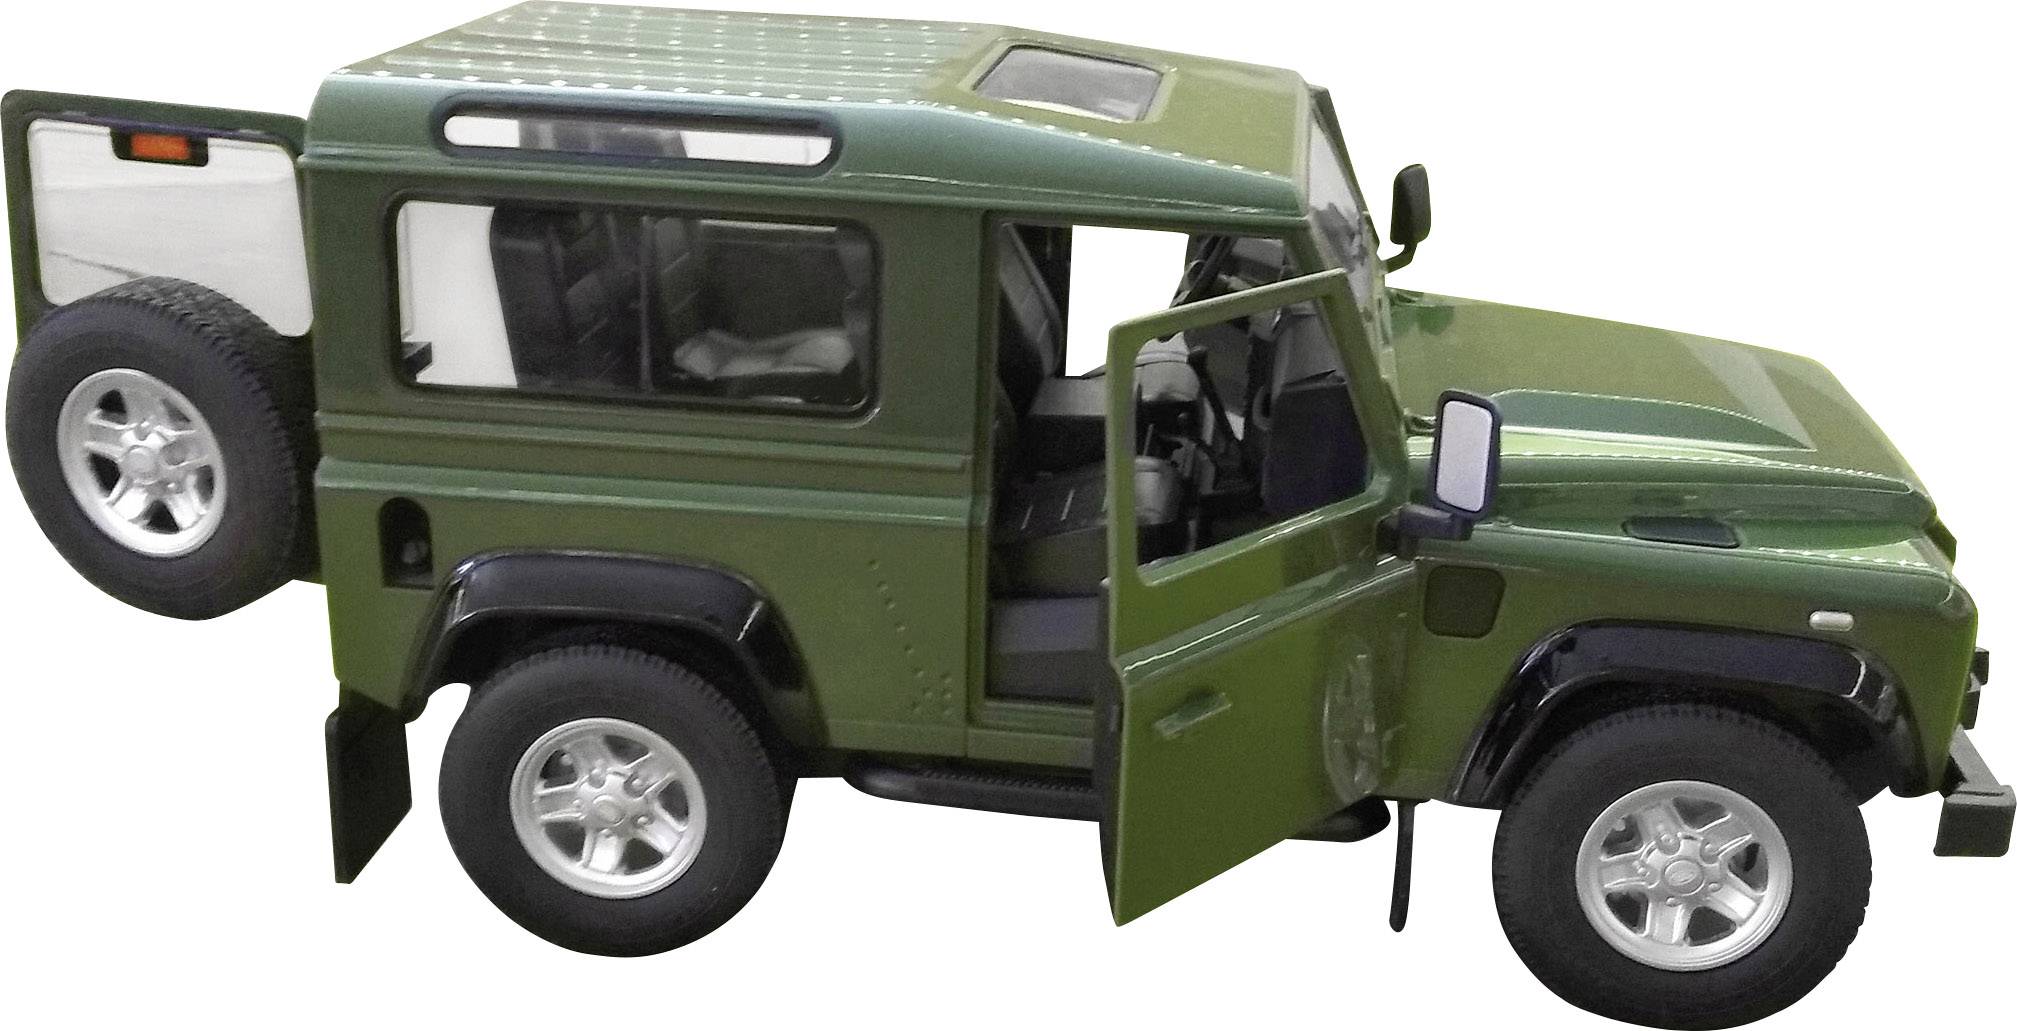 rc land rover defender